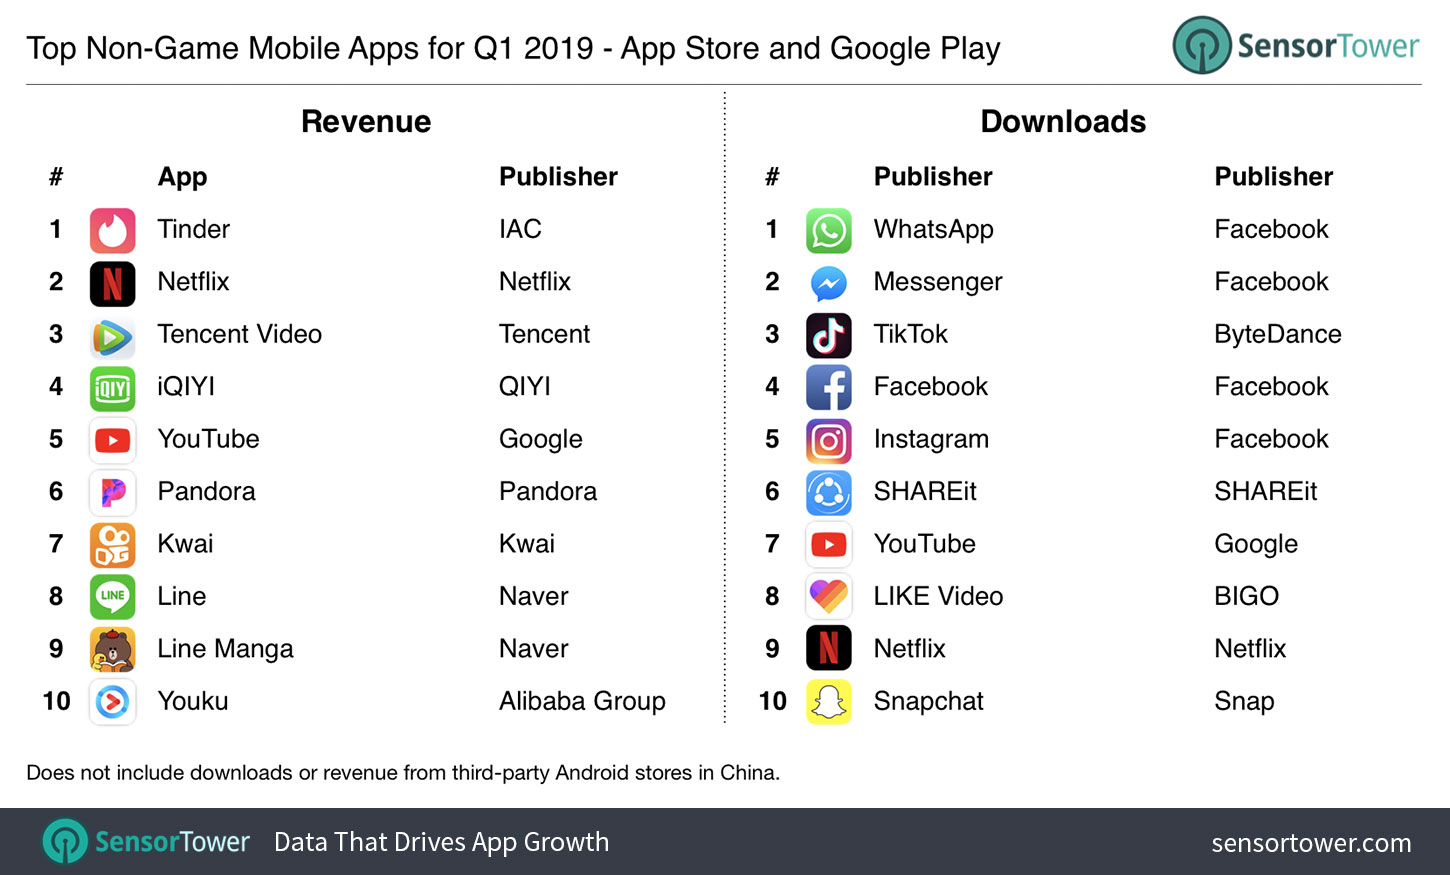 Q1 2019 Top Non-Game Mobile Apps by Revenue and Downloads